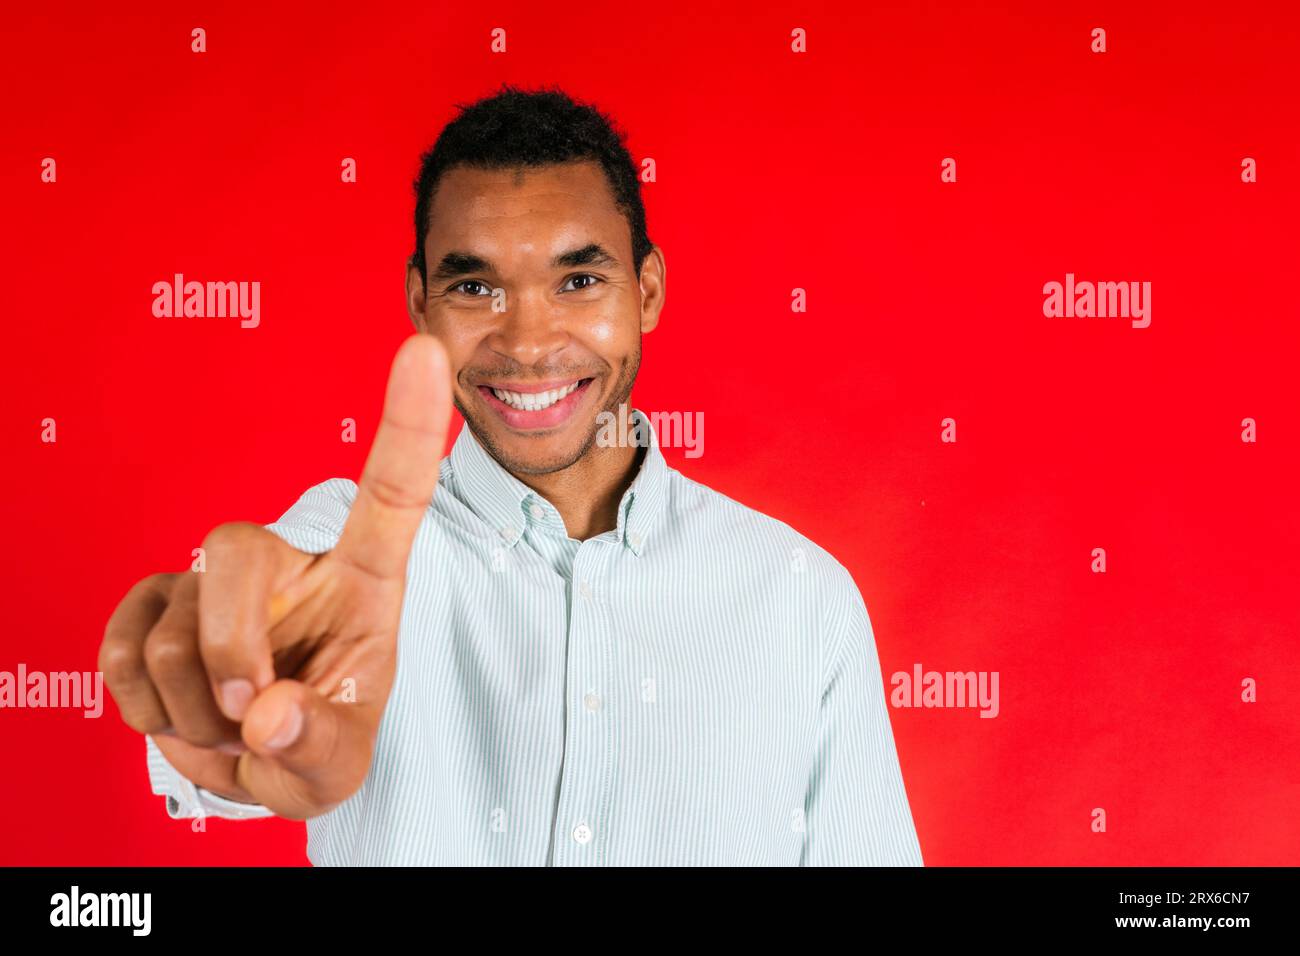 Smiling man pointing with index finger against red background Stock Photo